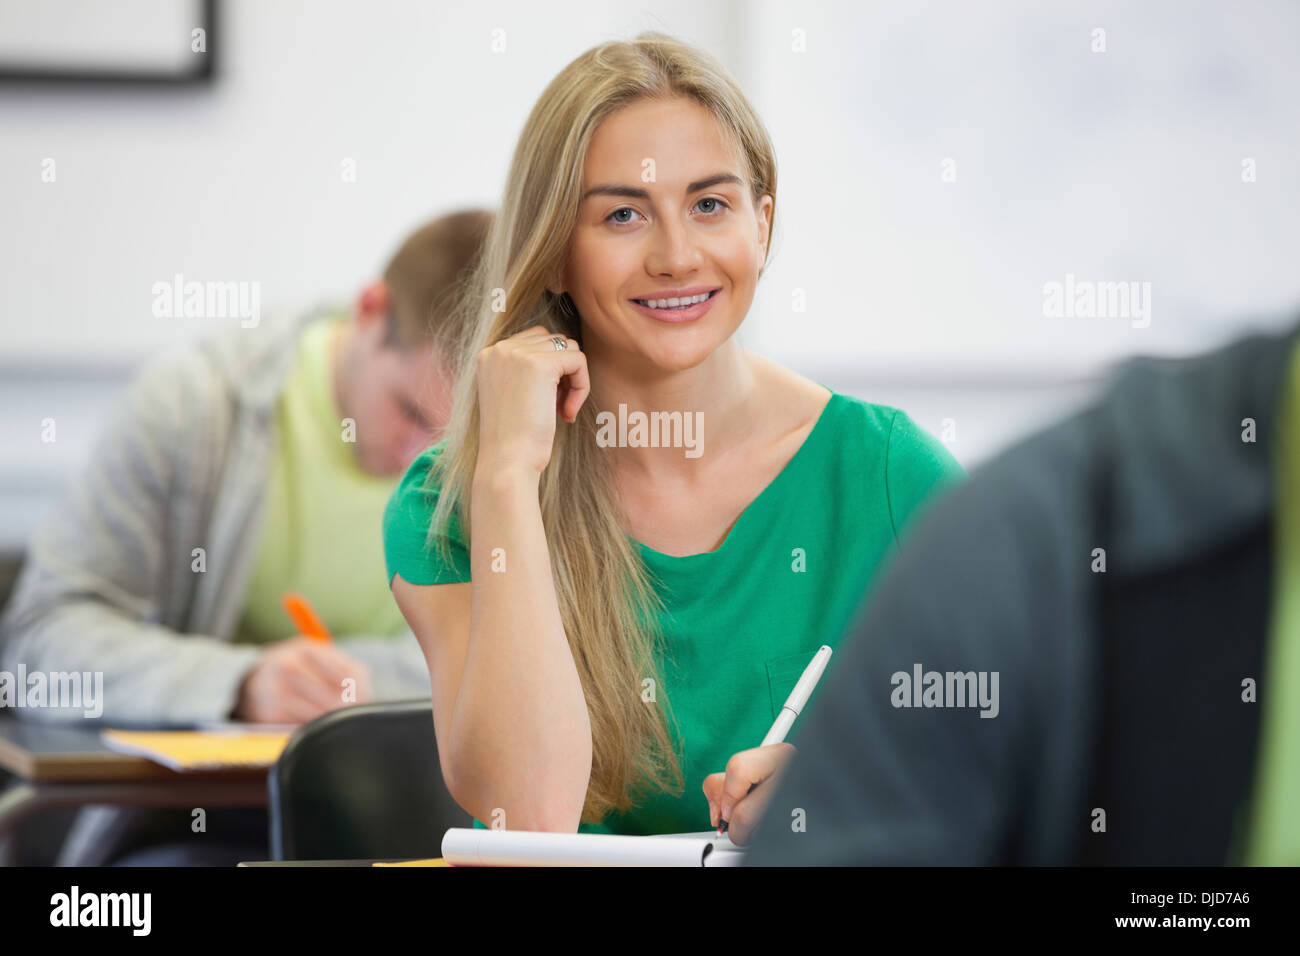 Pretty blonde student taking notes in class smiling at camera Stock Photo